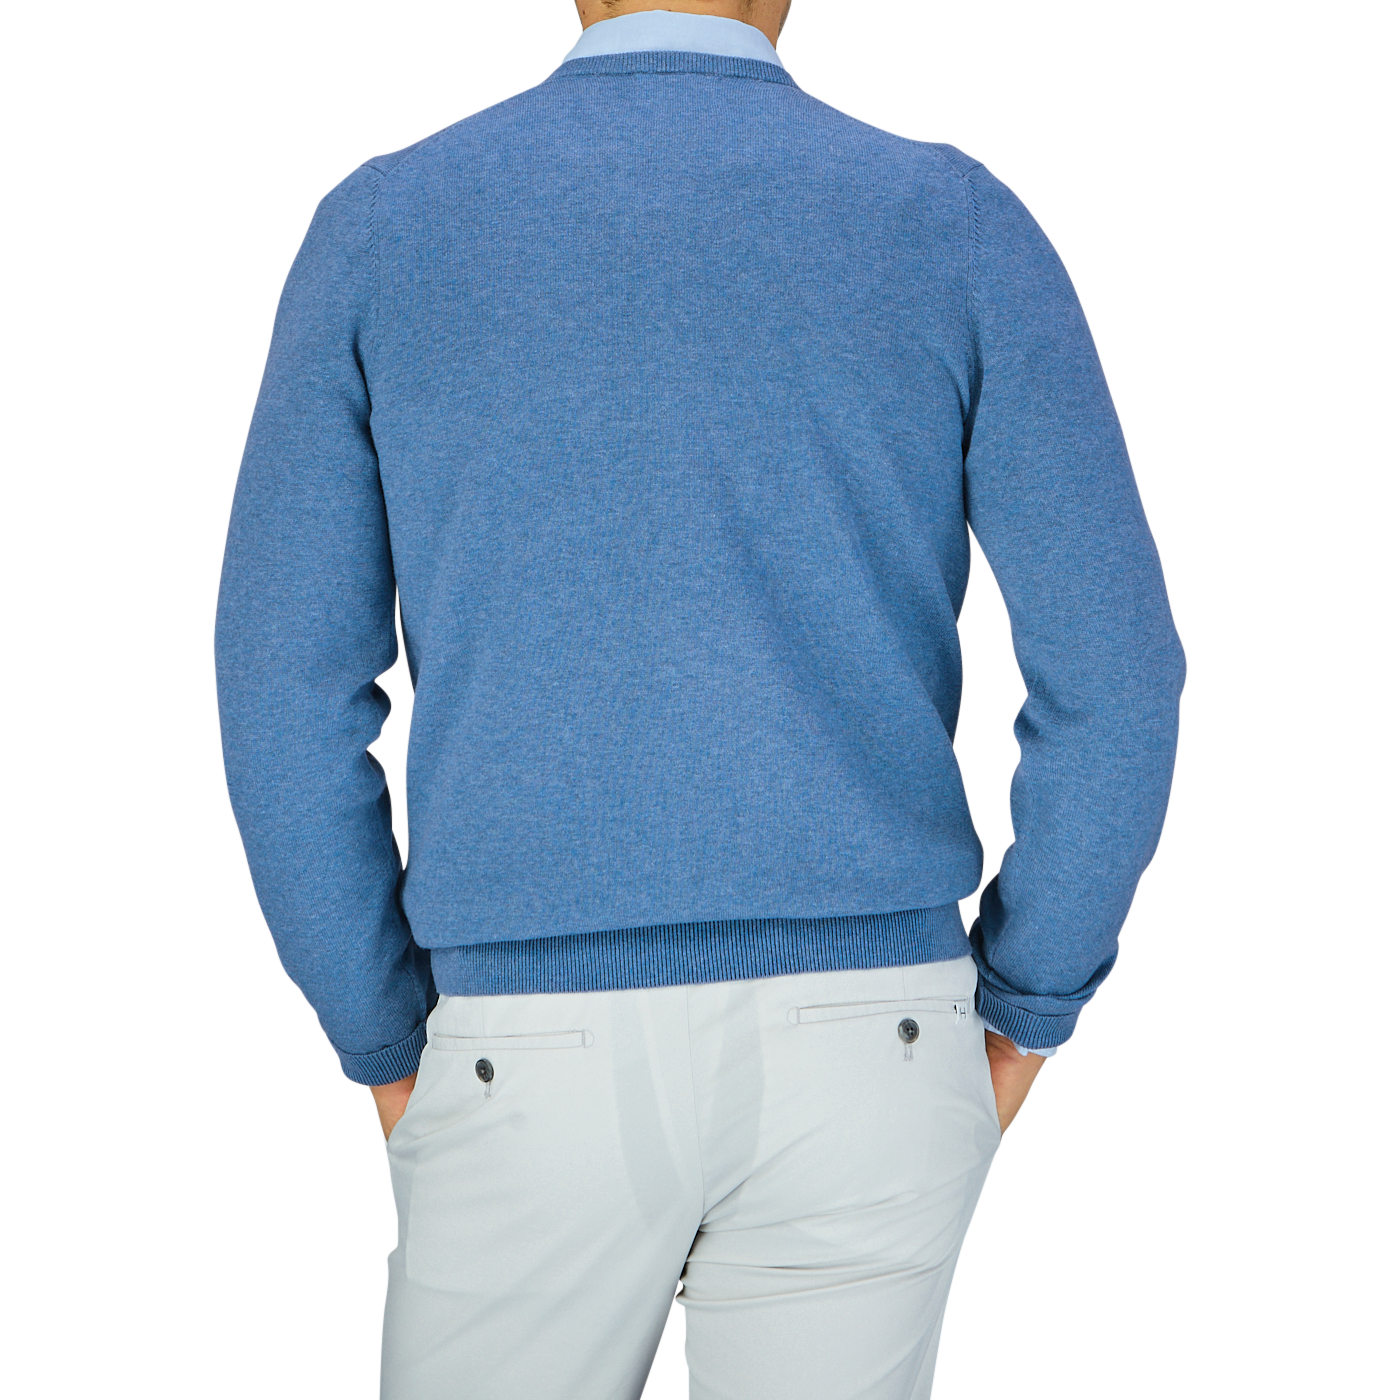 A person from behind wearing an Alan Paine Airforce Blue Luxury Cotton V-Neck Sweater and white pants.